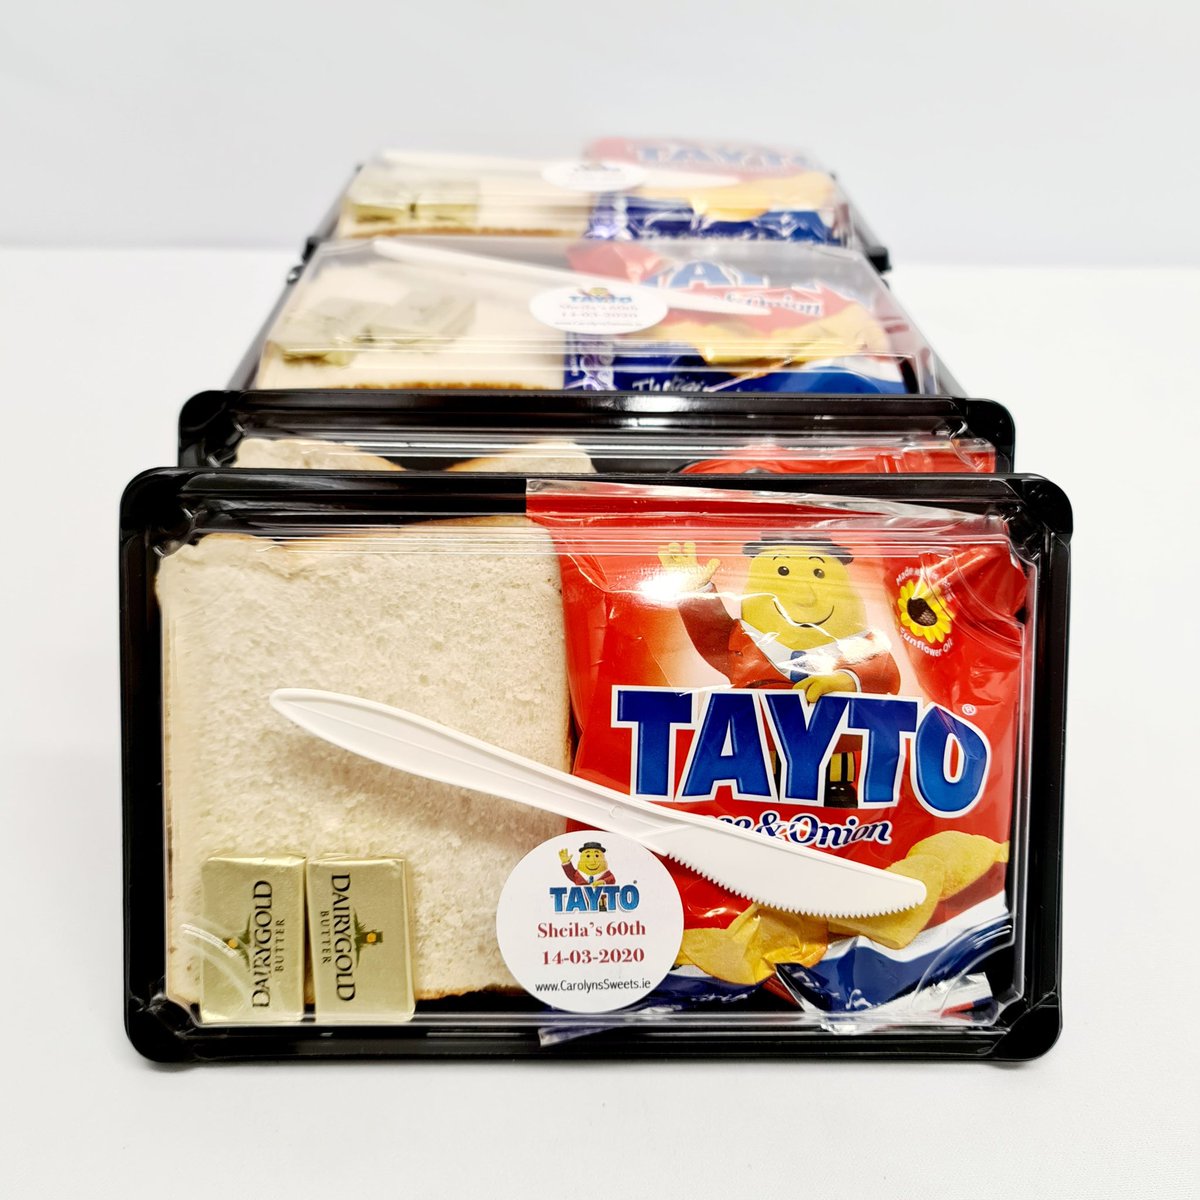 @sarahjane792 This is quite an typical Irish thing that later in the evening during an Irish Wedding people get peckish so out come the DIY crisp sambos. @MrTaytoIreland